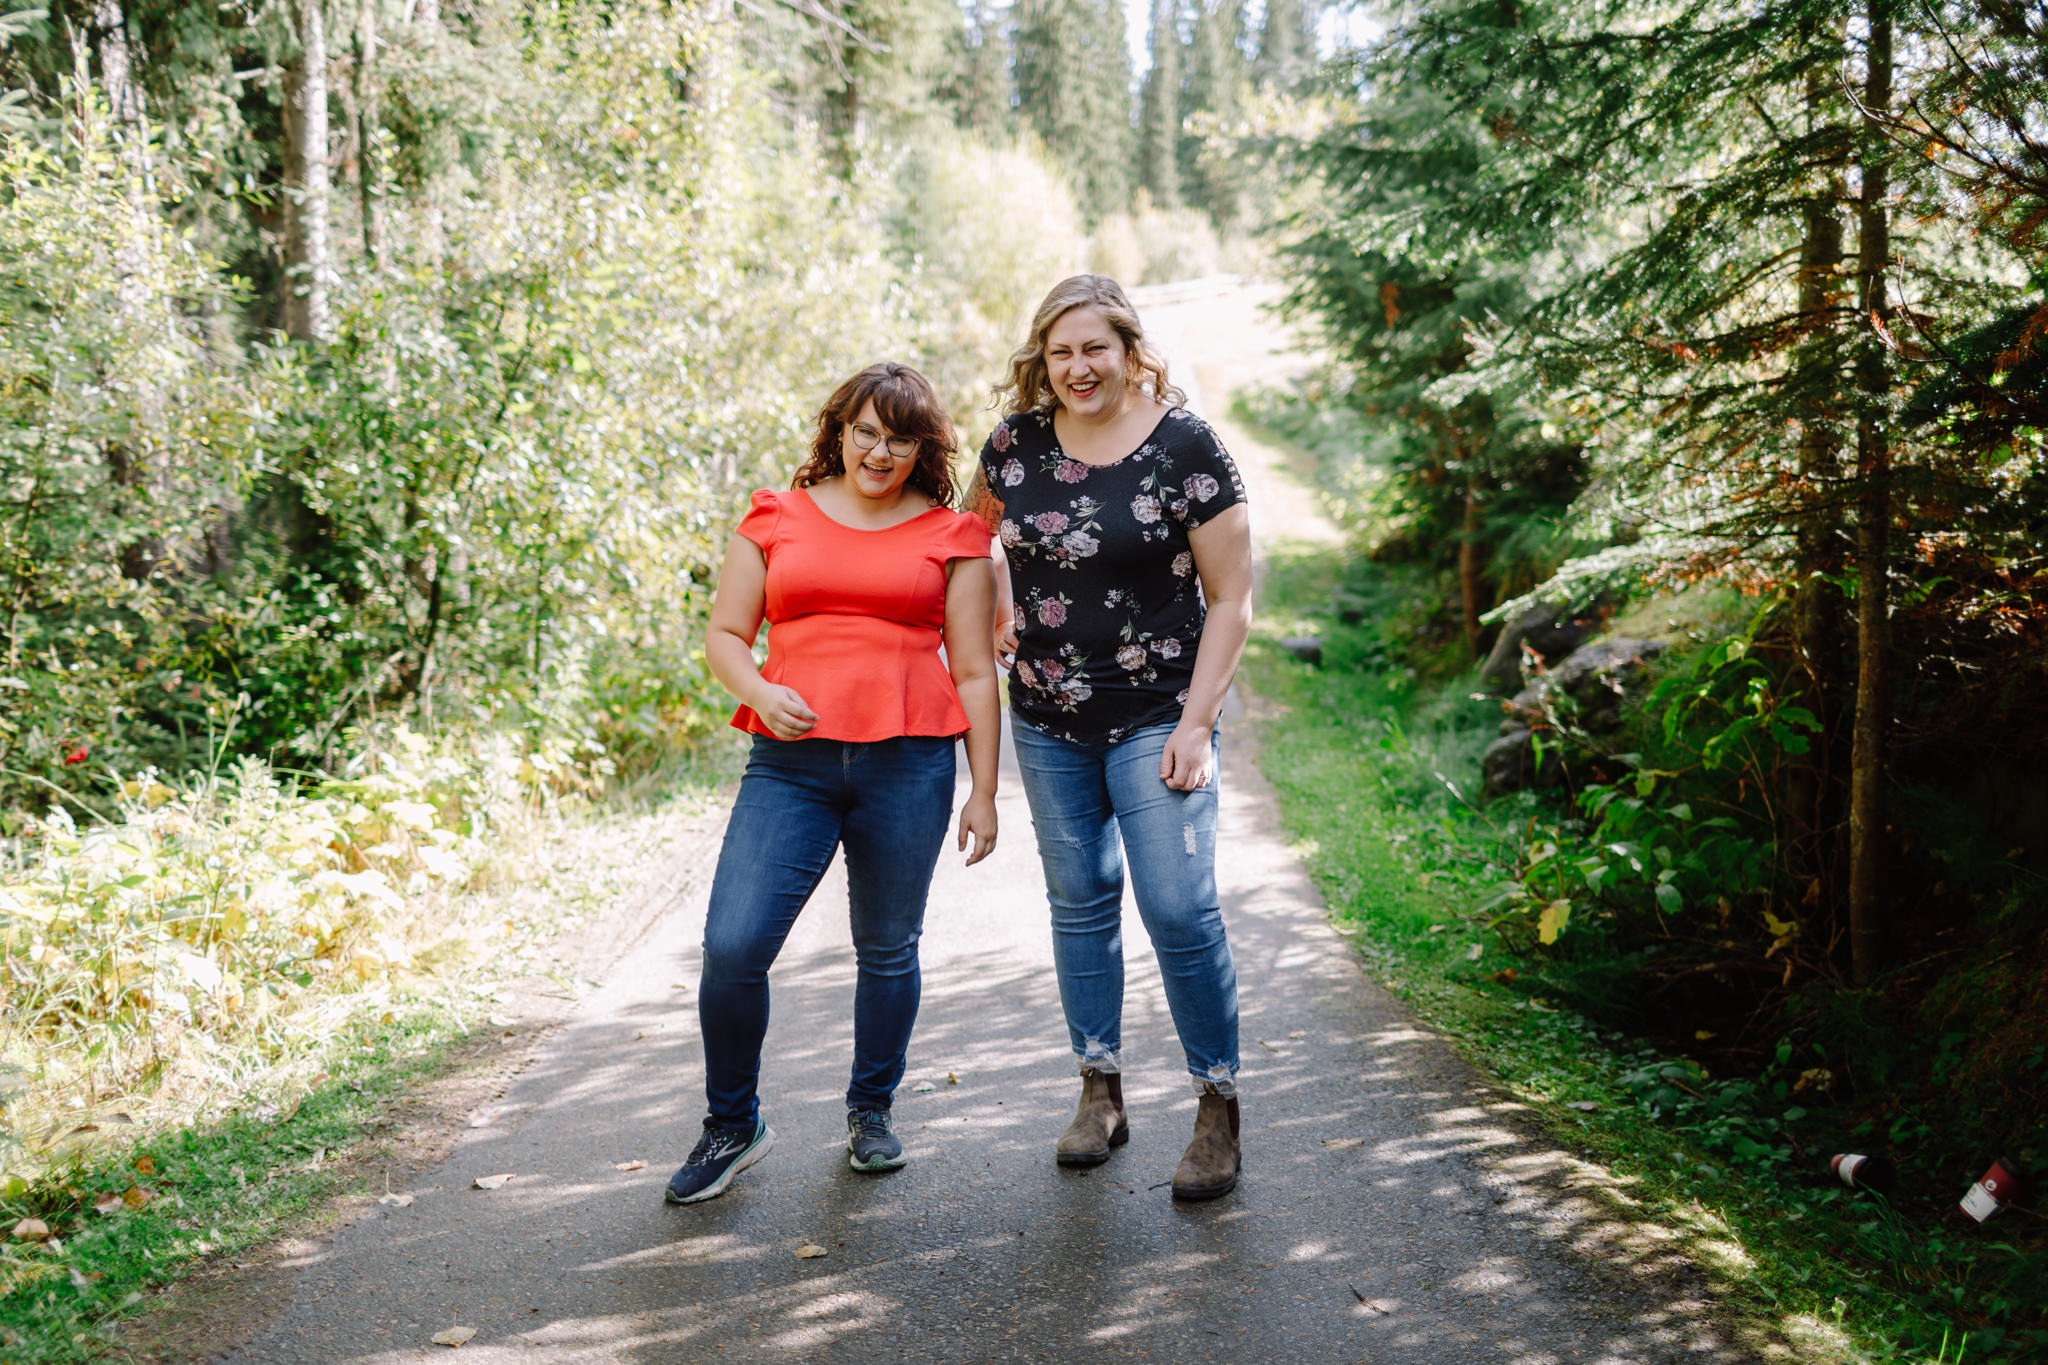 Two women stand together smiling in country lane